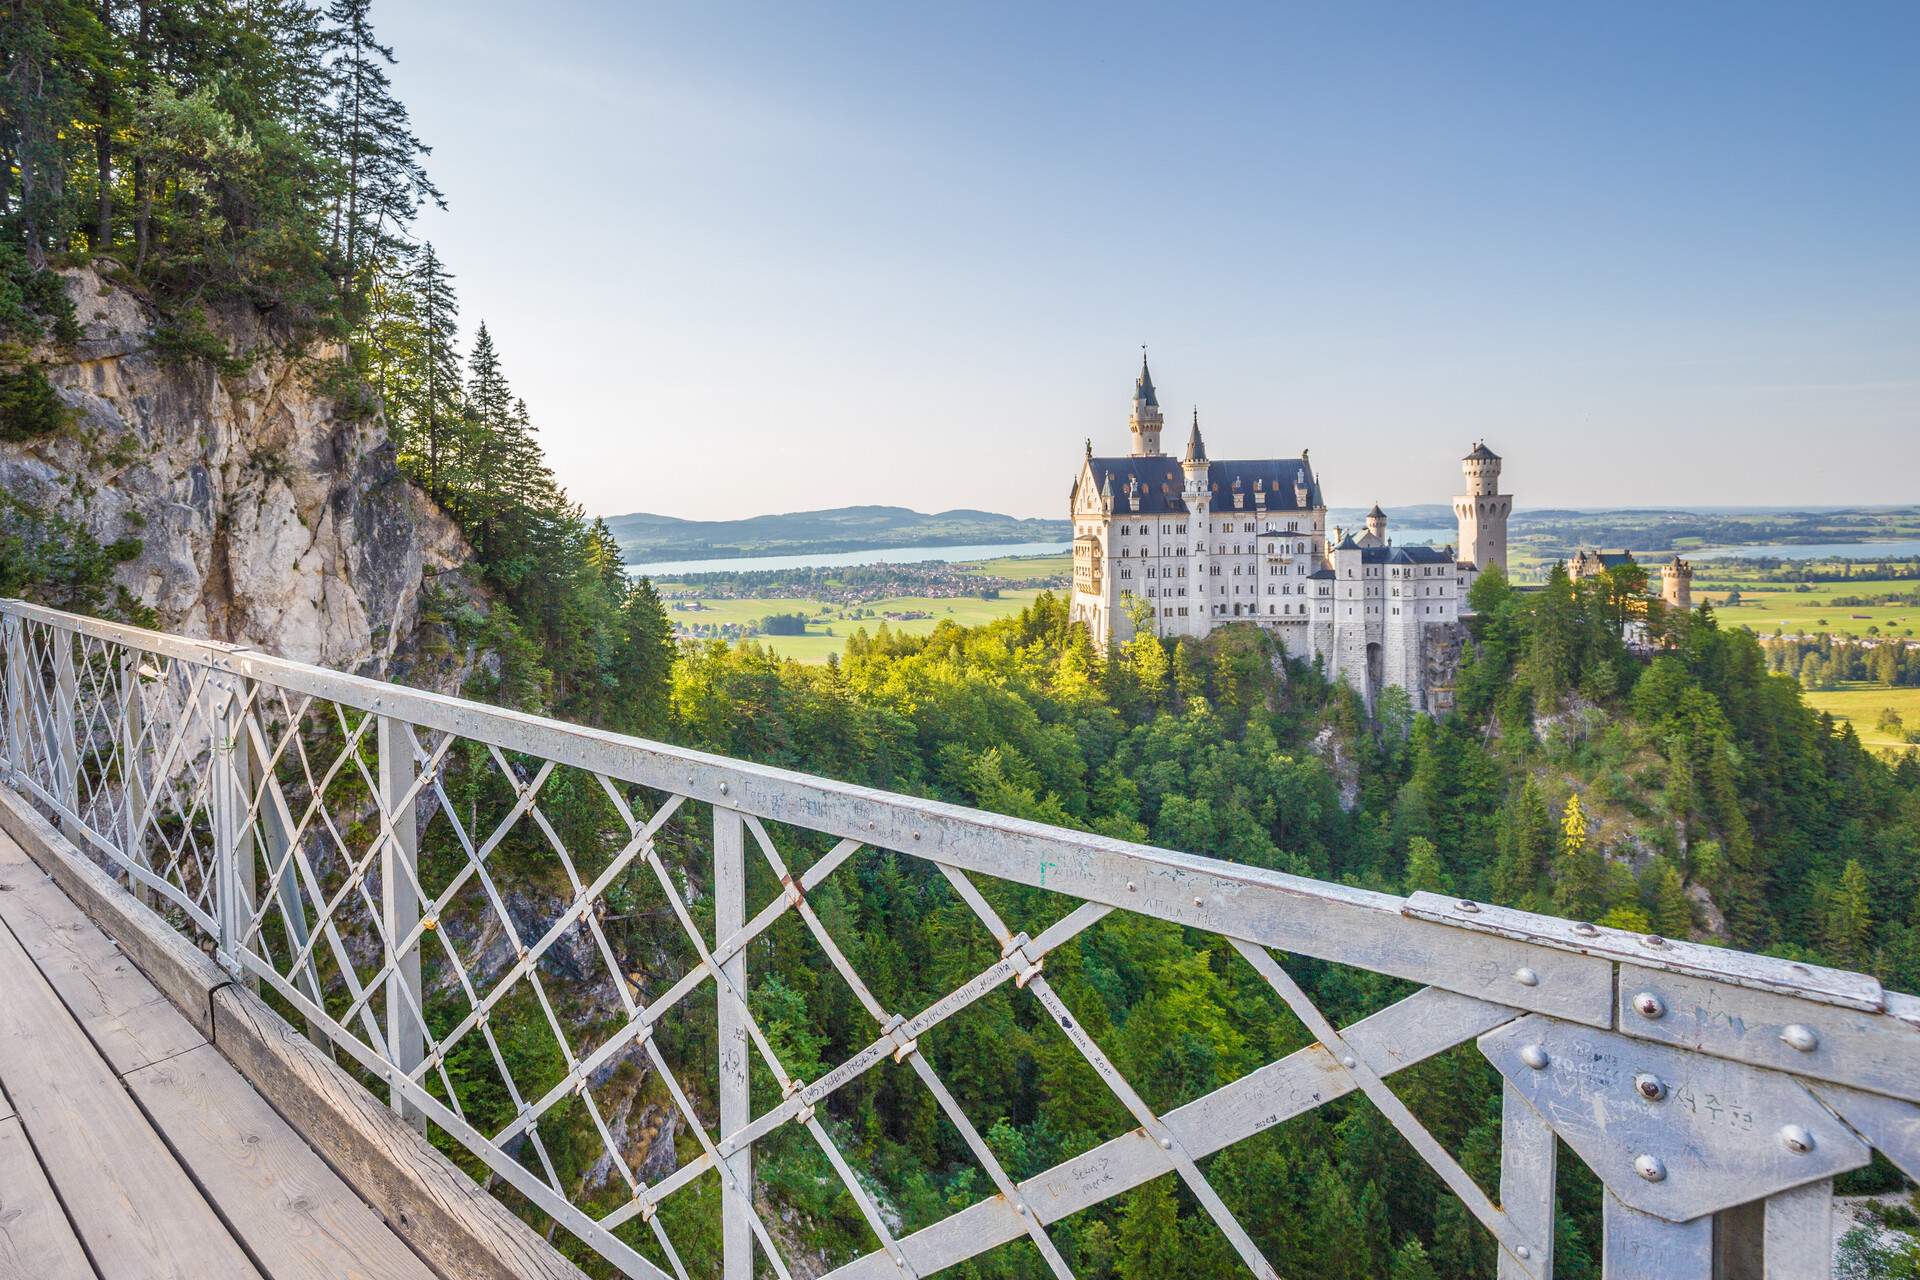 The Romanesque Revival palace of the famous Neuschwanstein Castle is surrounded by lush forest seen from the bridge.